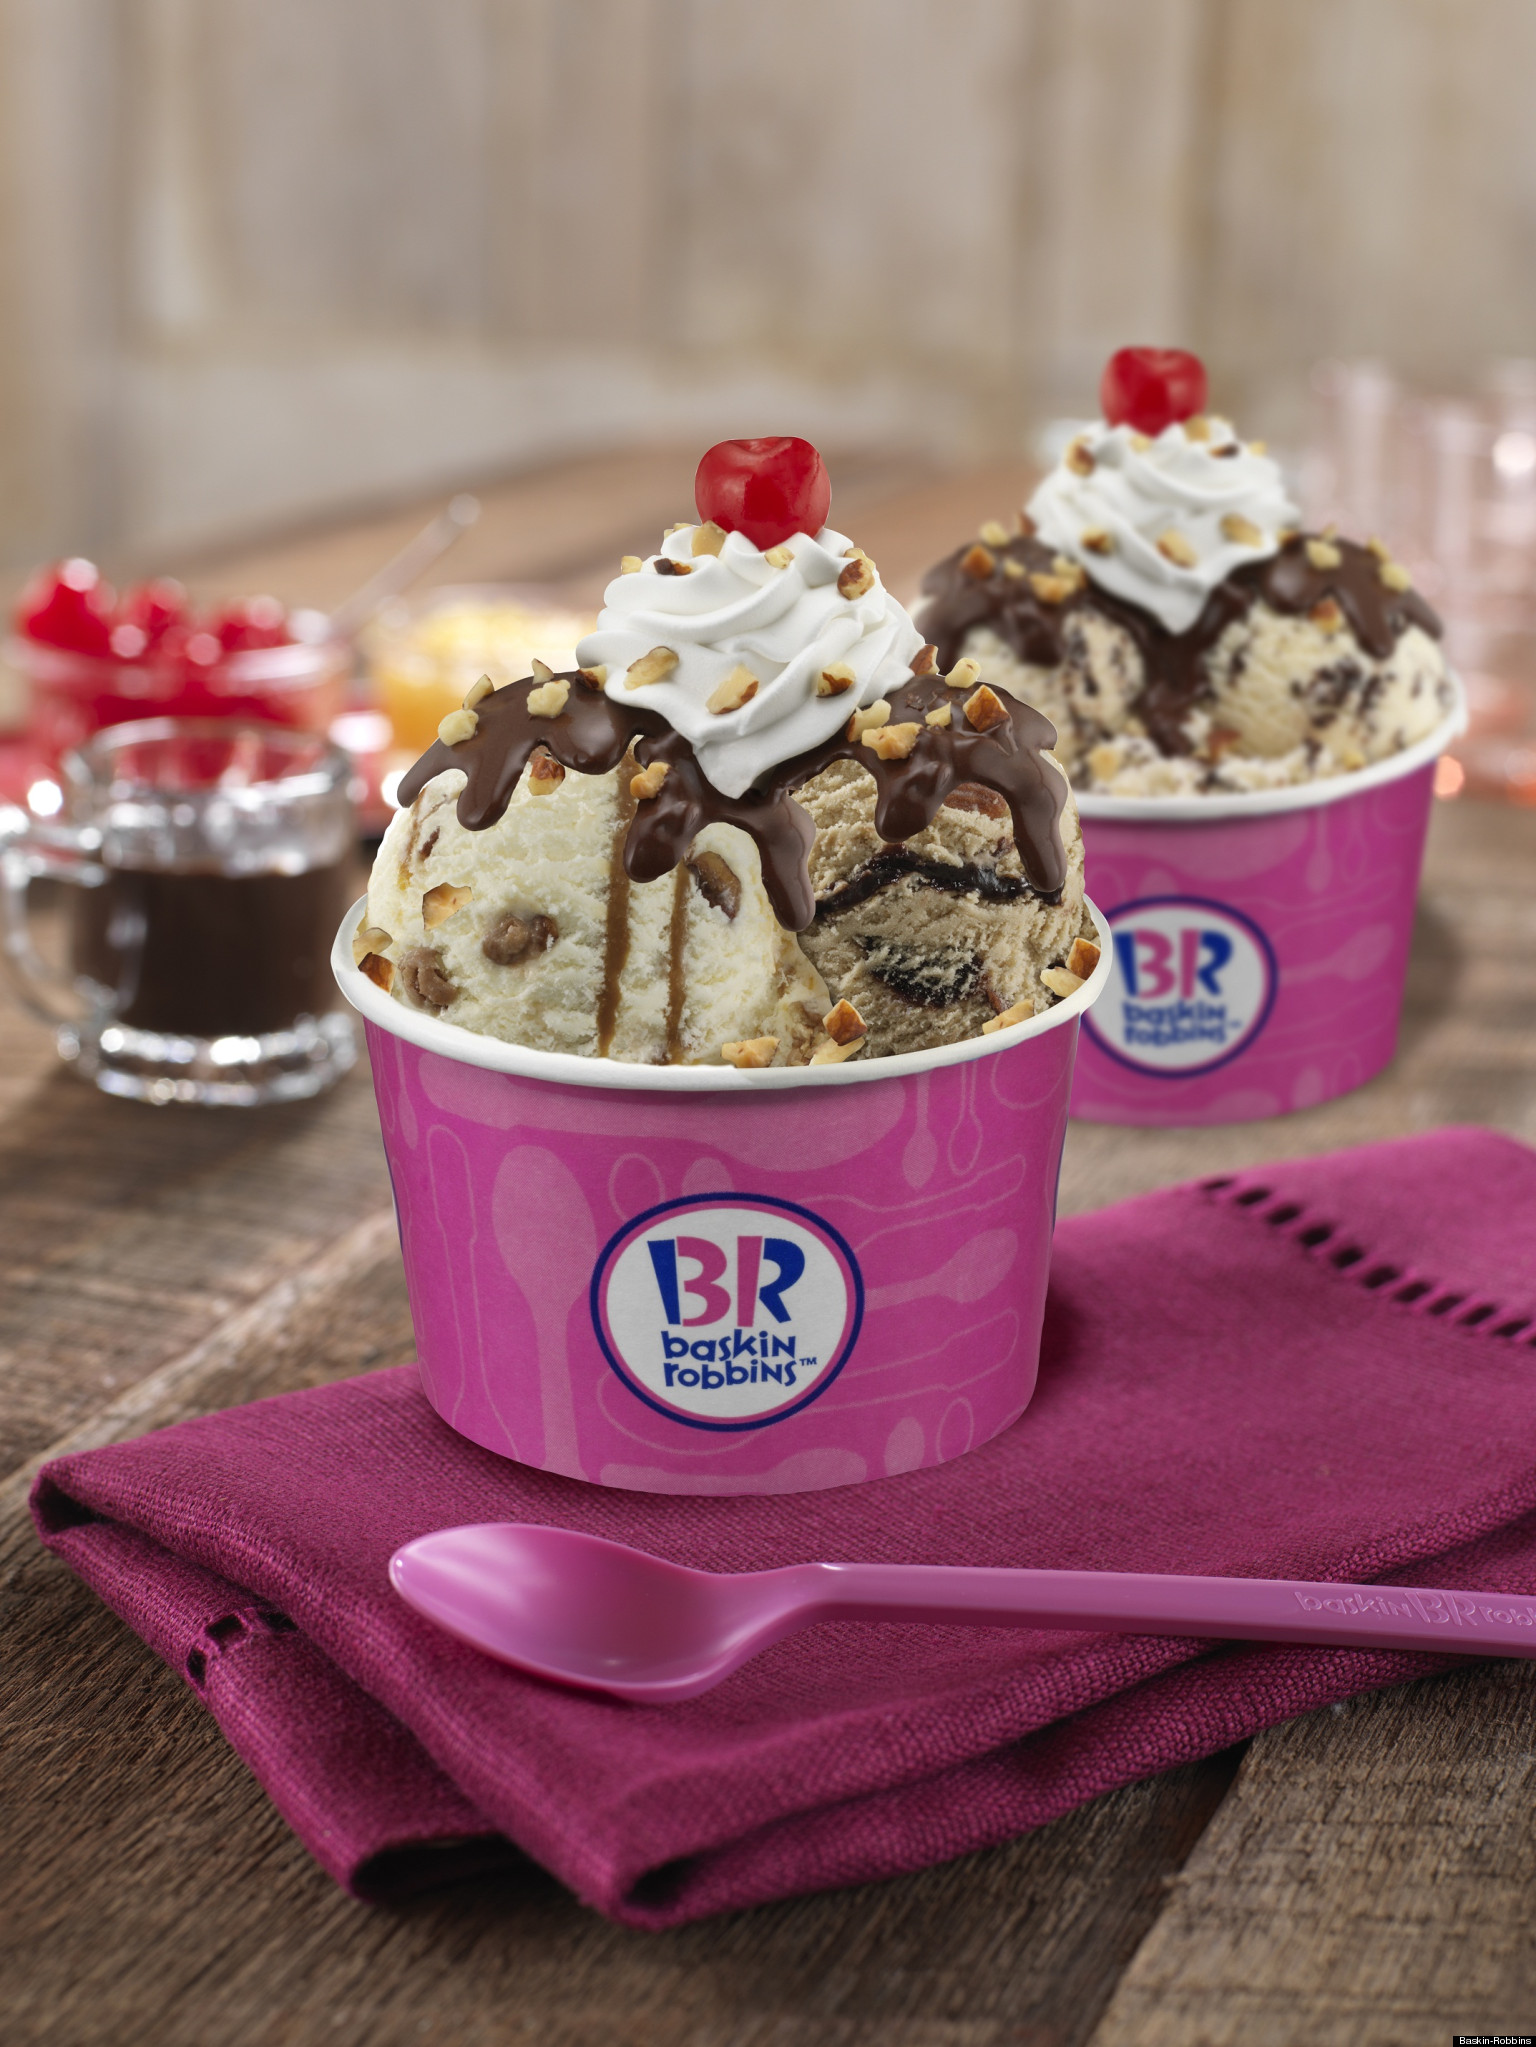 free-baskin-robbins-sundae-offered-with-purchase-every-wednesday